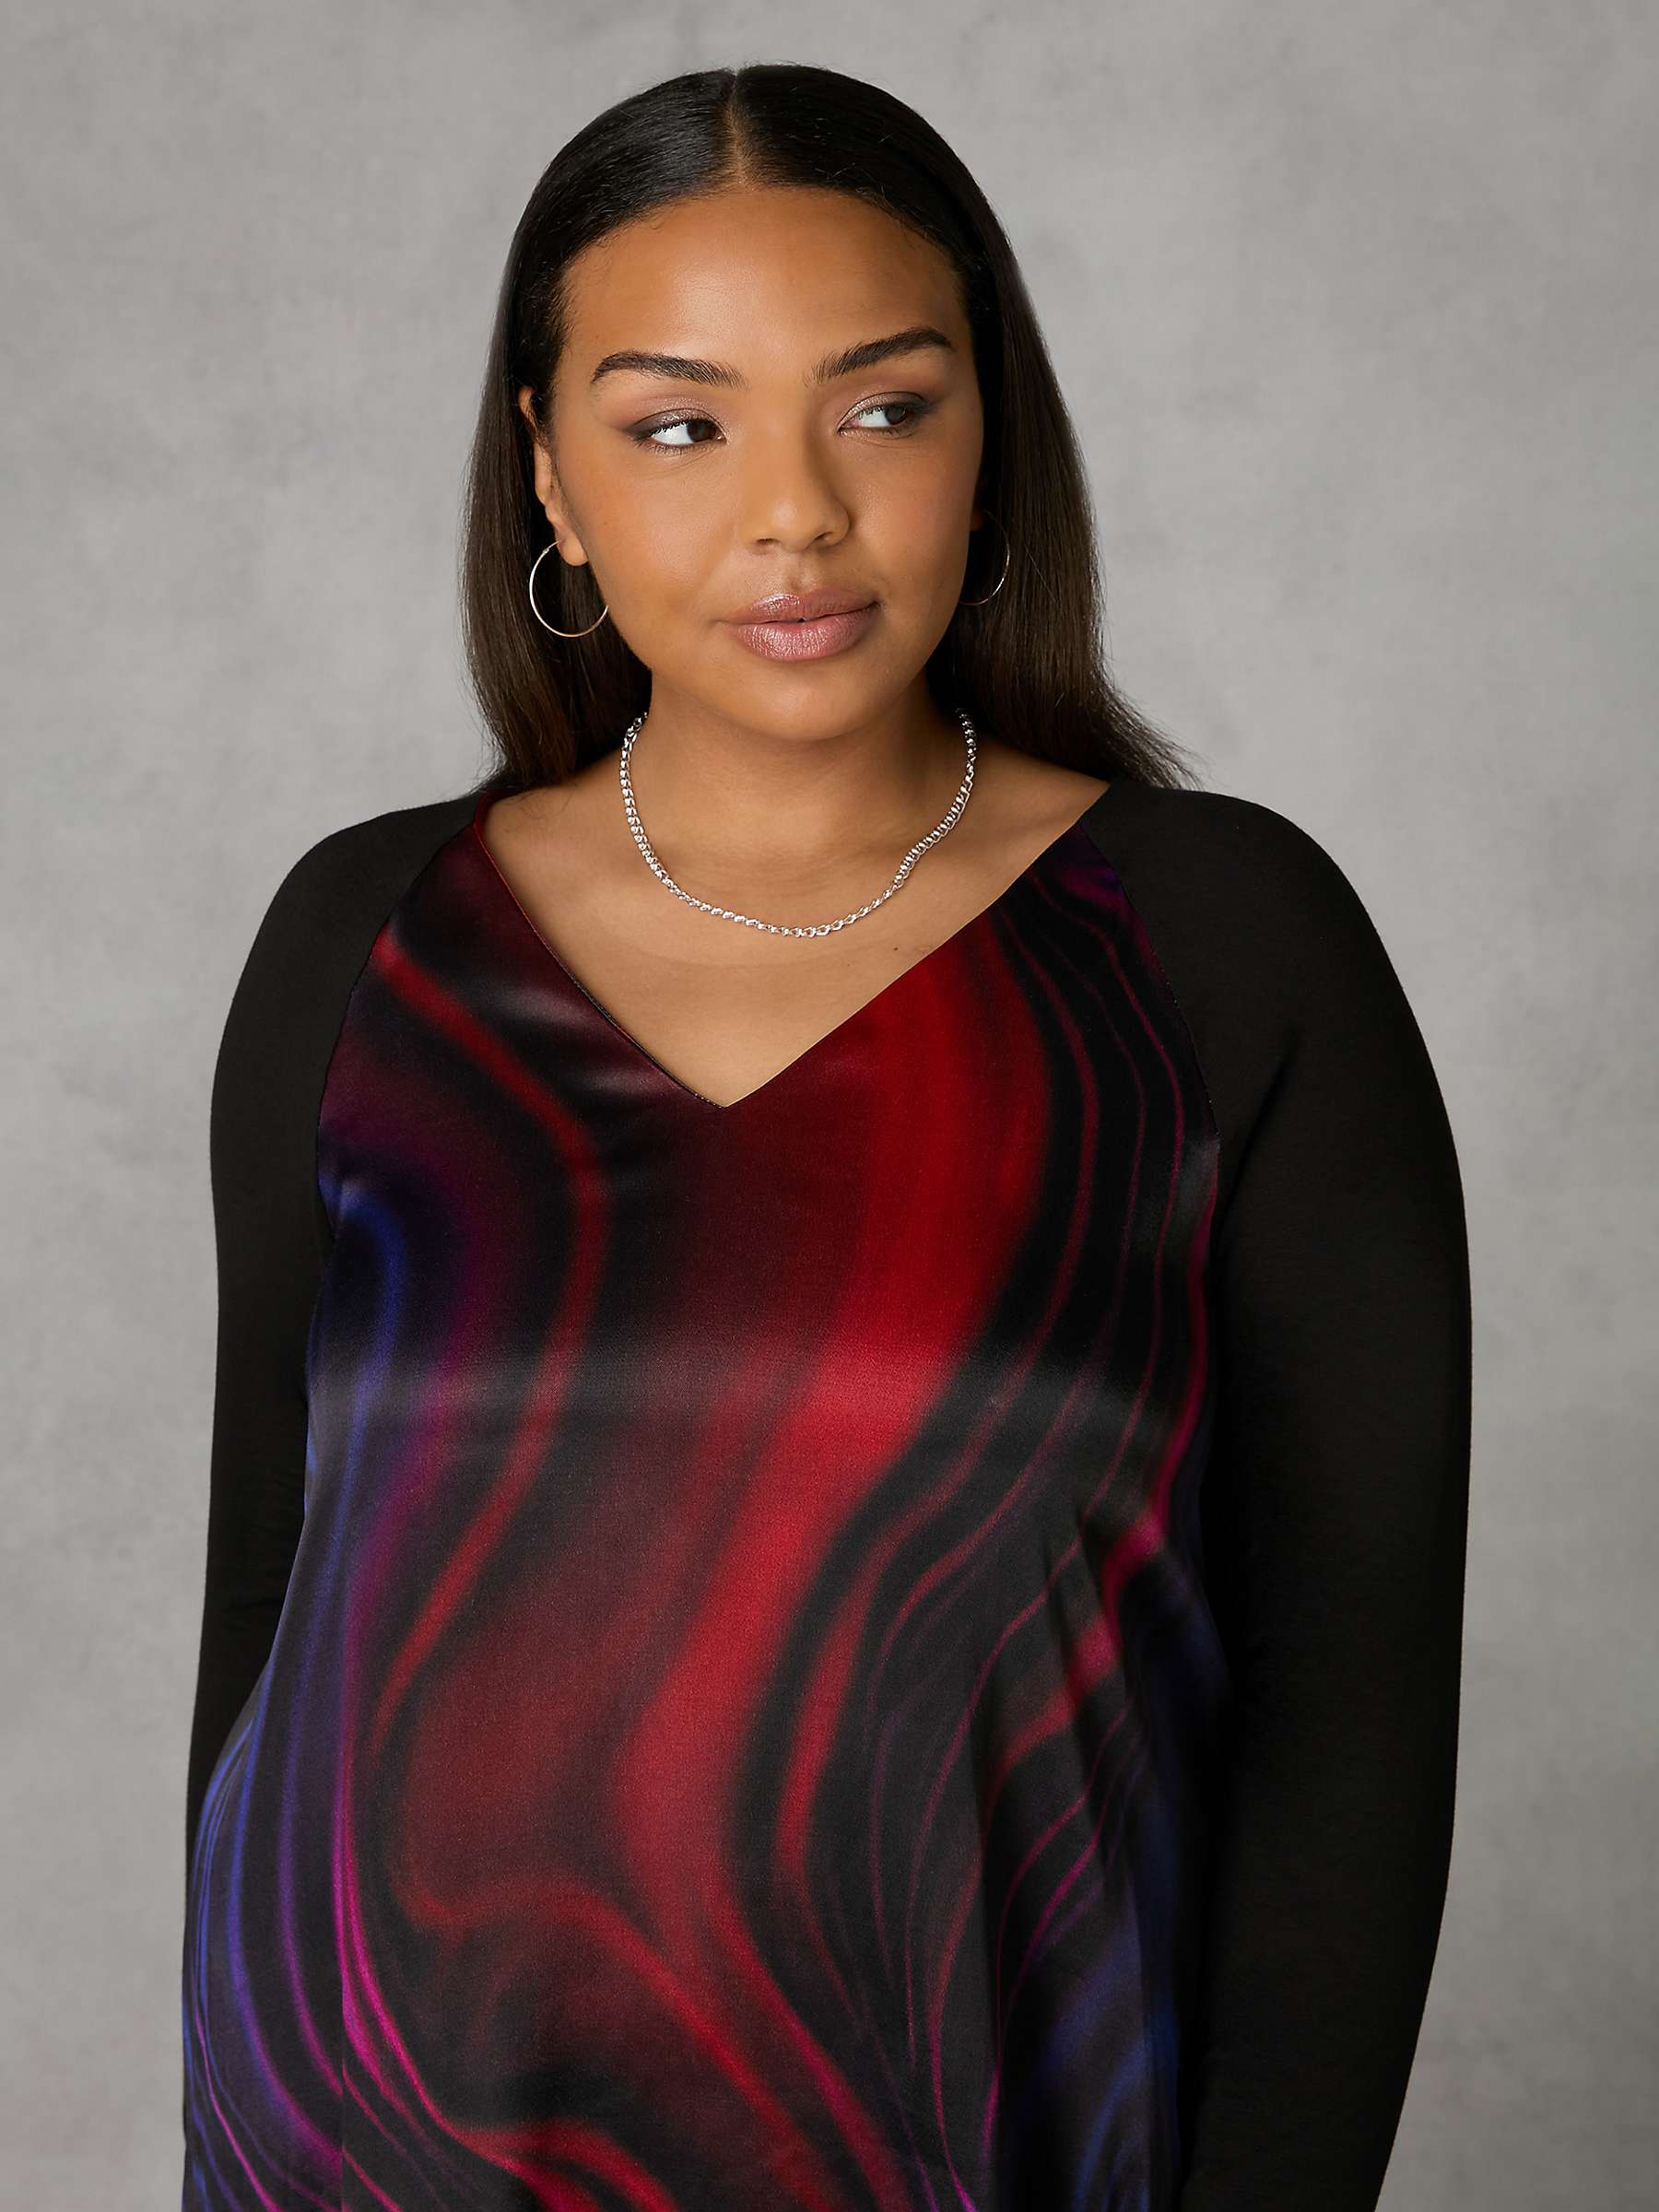 Buy Live Unlimited Curve Swirl Print Tunic, Black/Multi Online at johnlewis.com